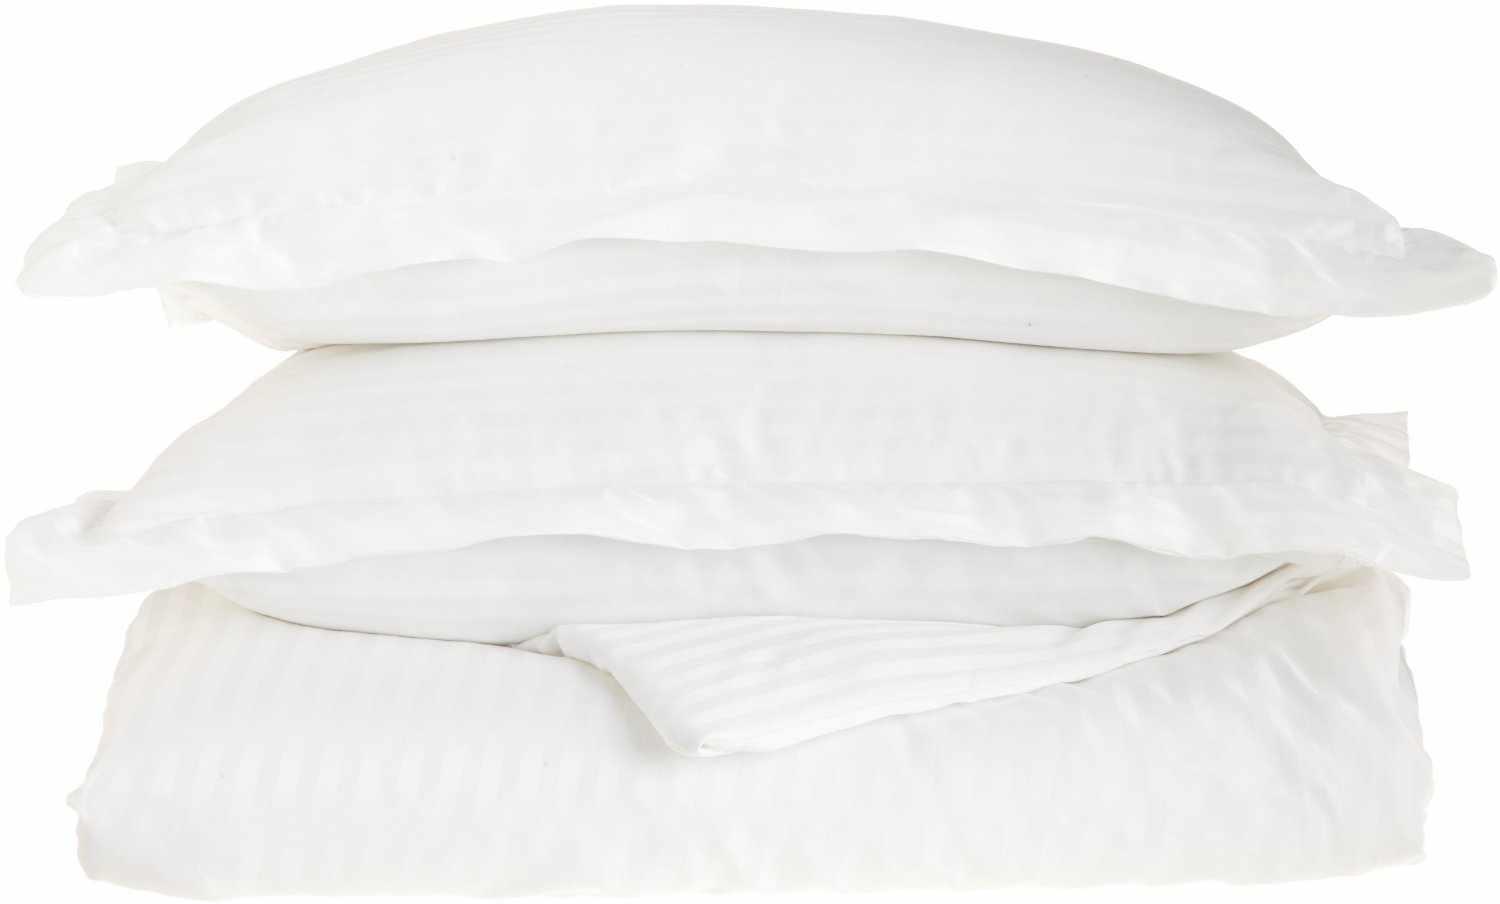  Superior Microfiber Wrinkle-Free Stripe Breathable Duvet Cover Set with Button Closure - White